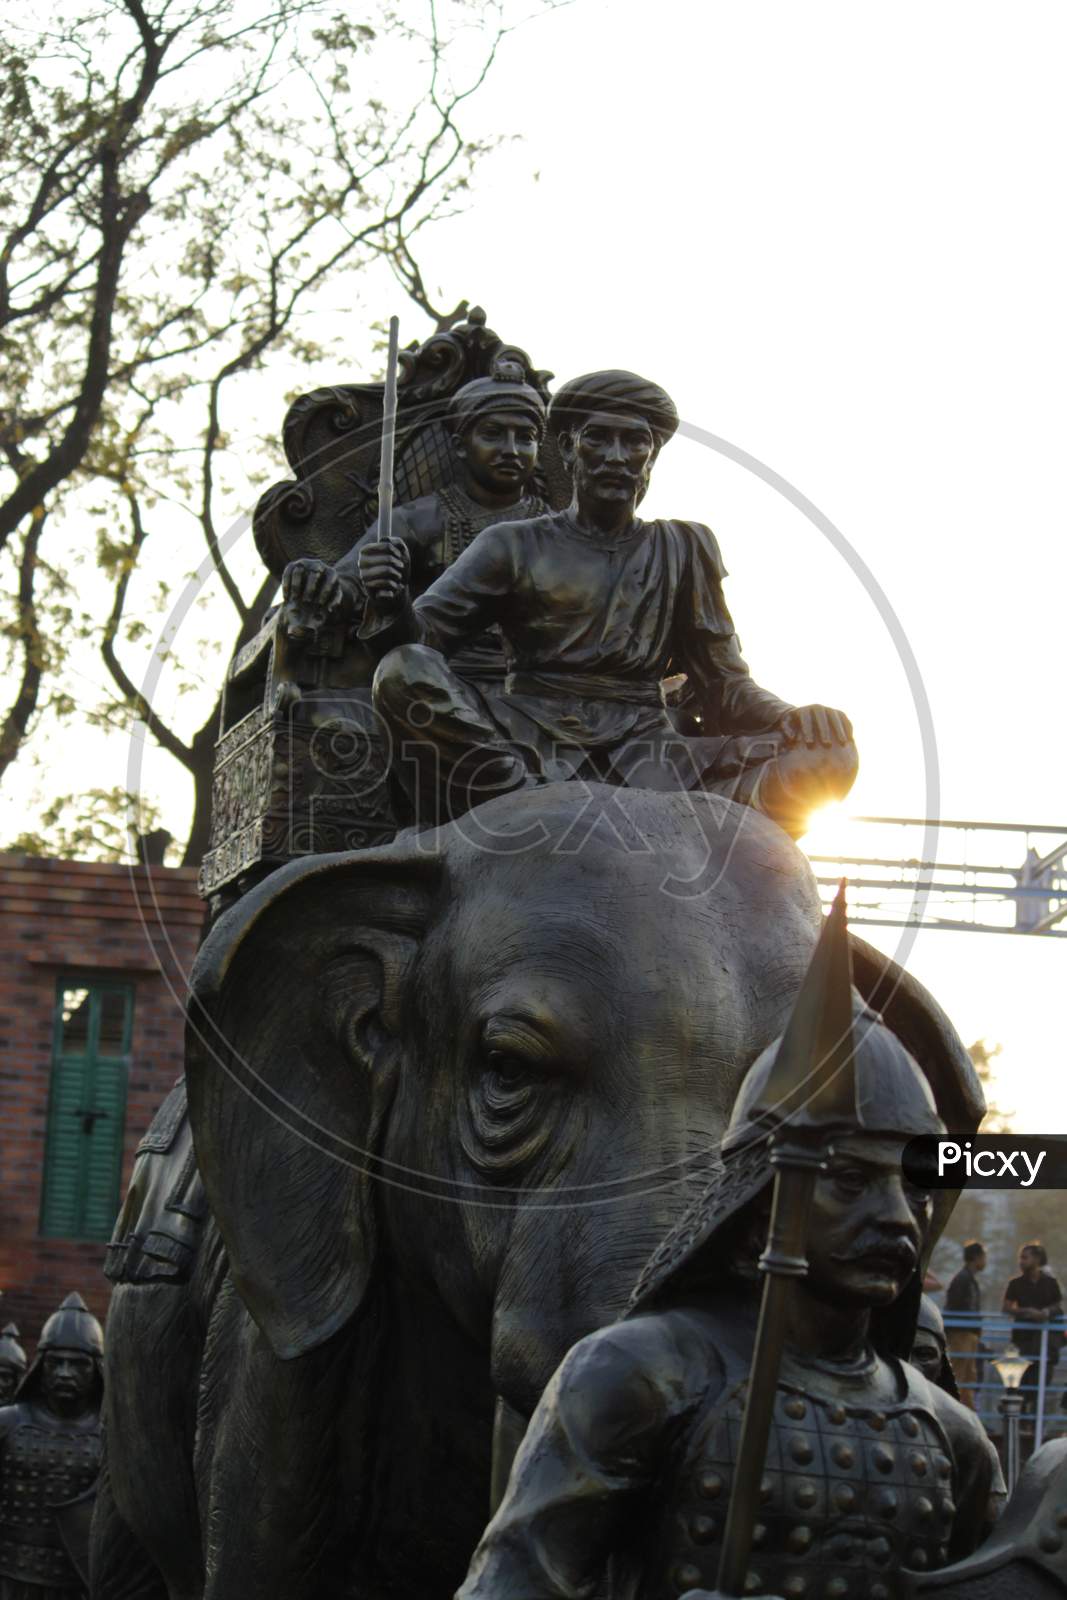 Indian historical King's sitting arrangements on elephant in war time display with selective focus at "Shivaji Park" on ,Barasat, North 24 Parganas.